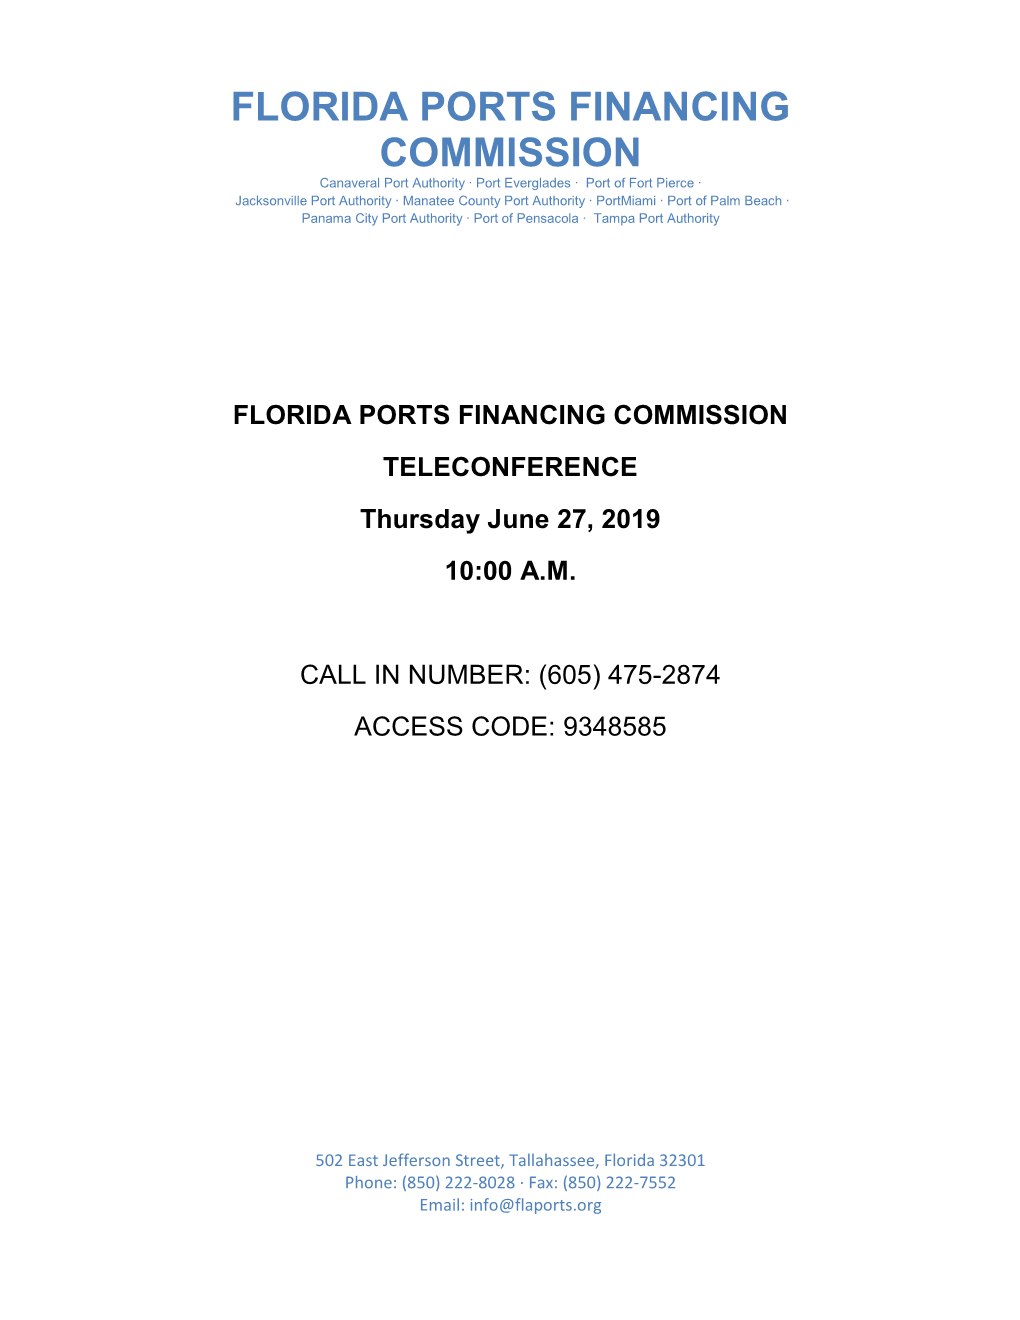 FLORIDA PORTS FINANCING COMMISSION TELECONFERENCE Thursday June 27, 2019 10:00 A.M